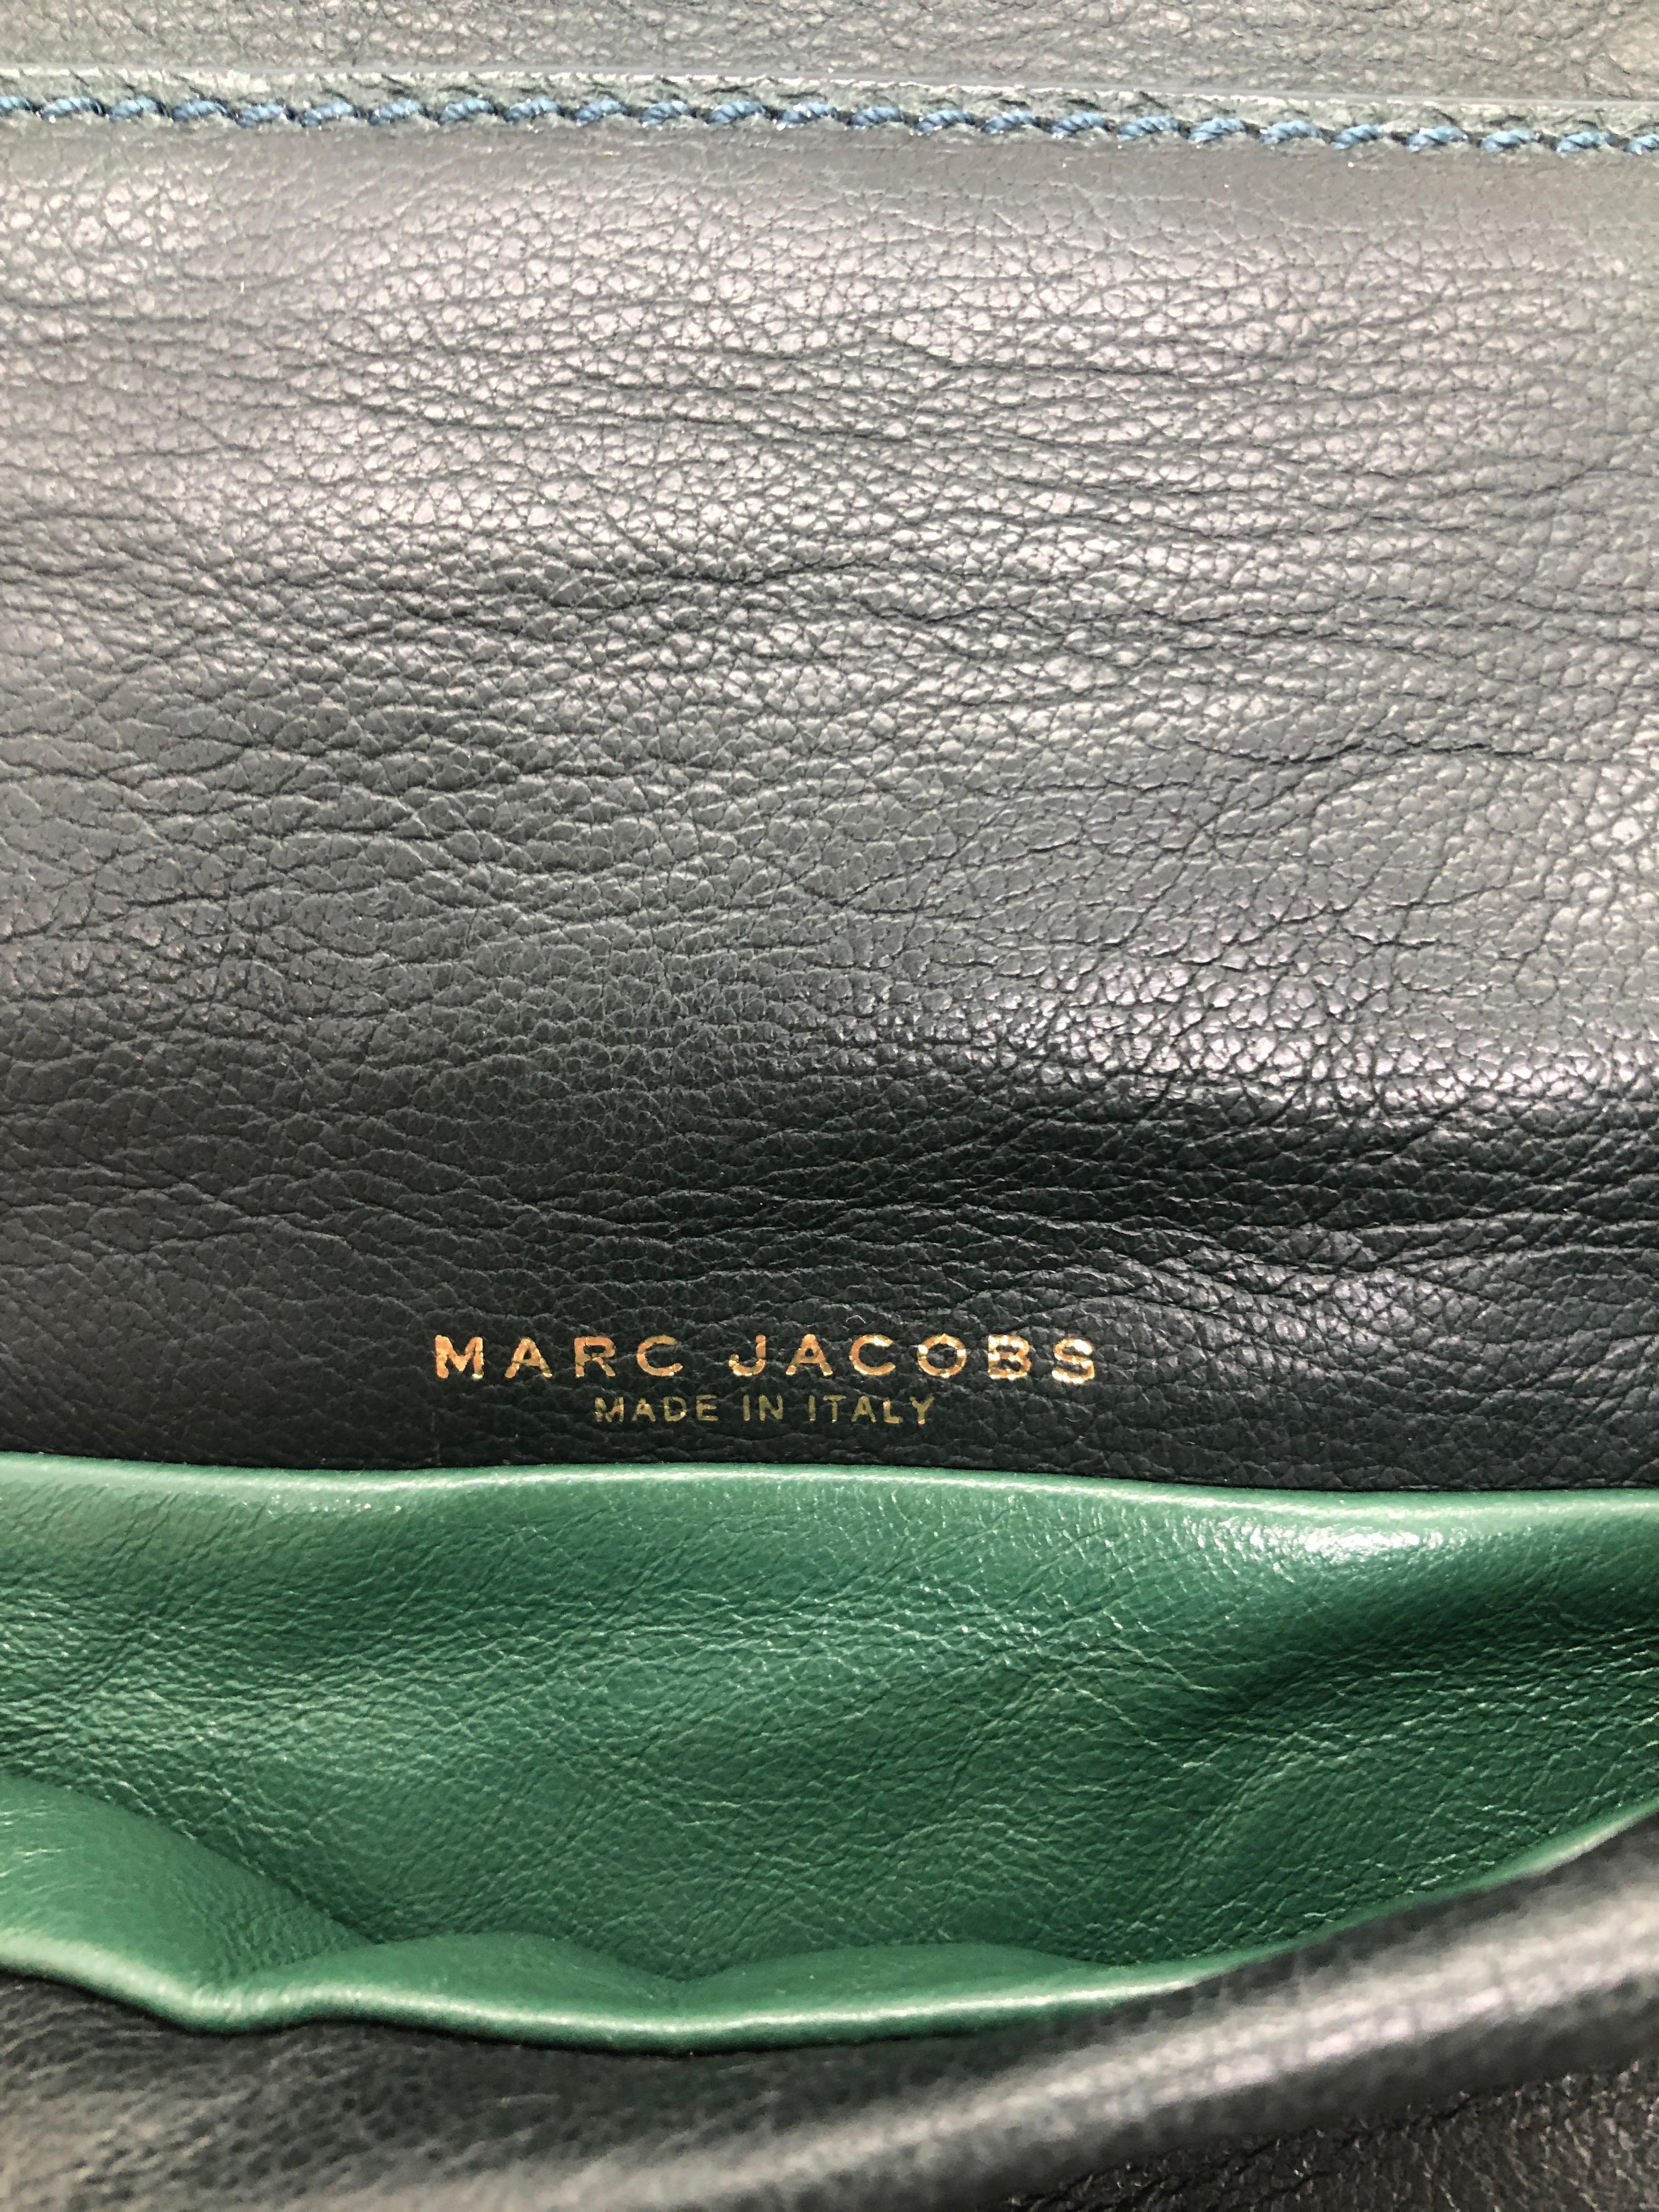 Marc Jacobs Green Leather Double Saddlebag w/ Top Handle & Metal / Jewel Accents 11